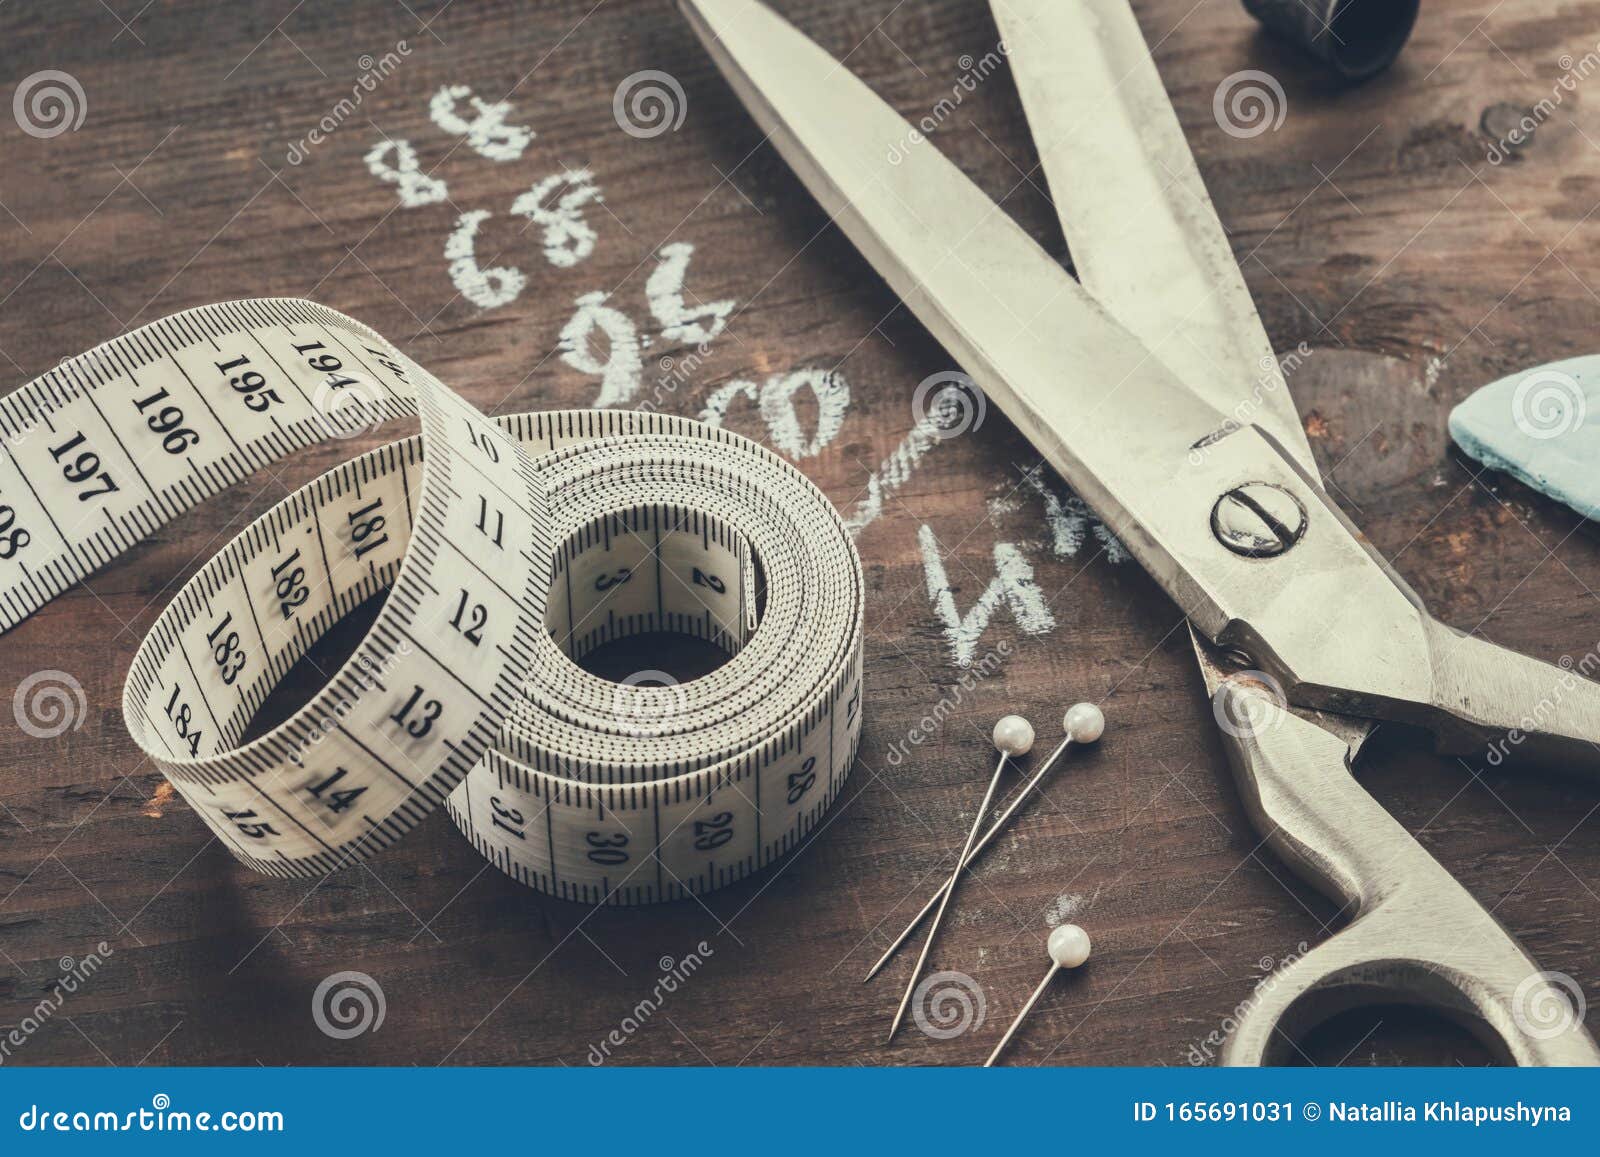 Sewing items: tailoring scissors, measuring tape, thimble, spools